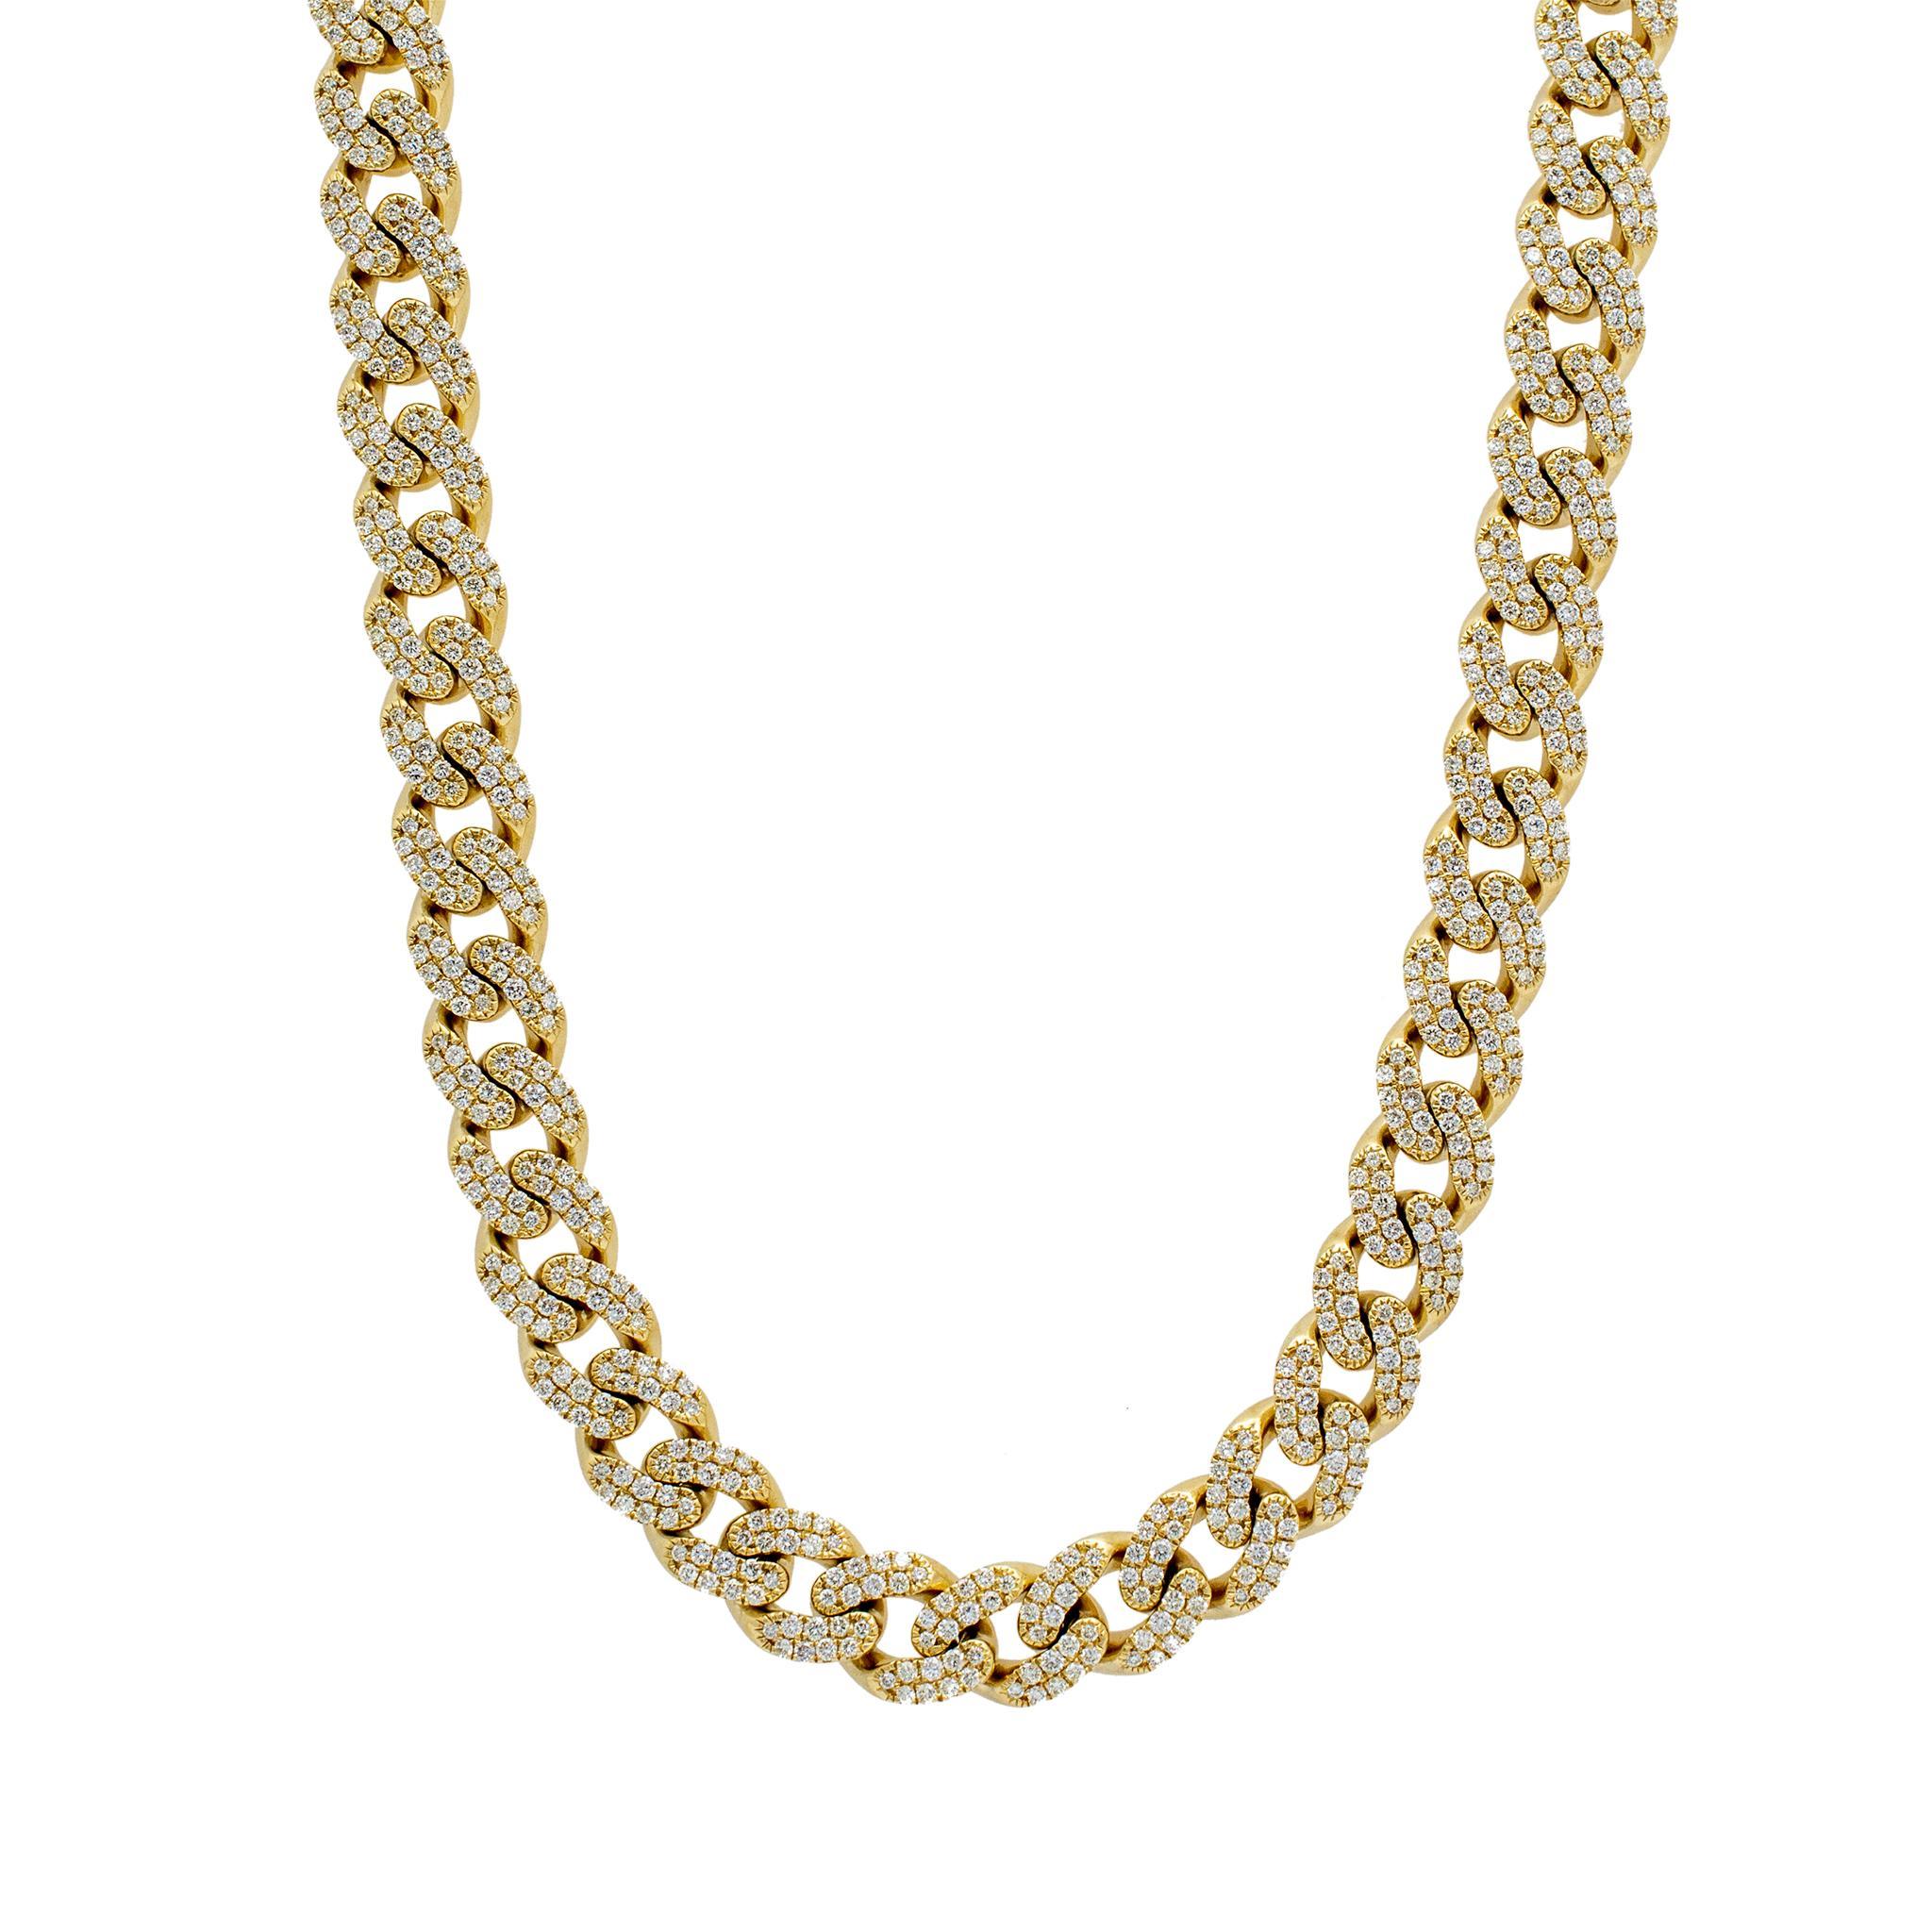 Metal Type: 10K Yellow Gold

Length: 22.00 inches

Width: 9.00 mm

Weight: 120.52 grams

One custom-made polished 10K yellow gold diamond Cuban link chain. The metal was tested and determined to be 10K yellow gold. Engraved with 